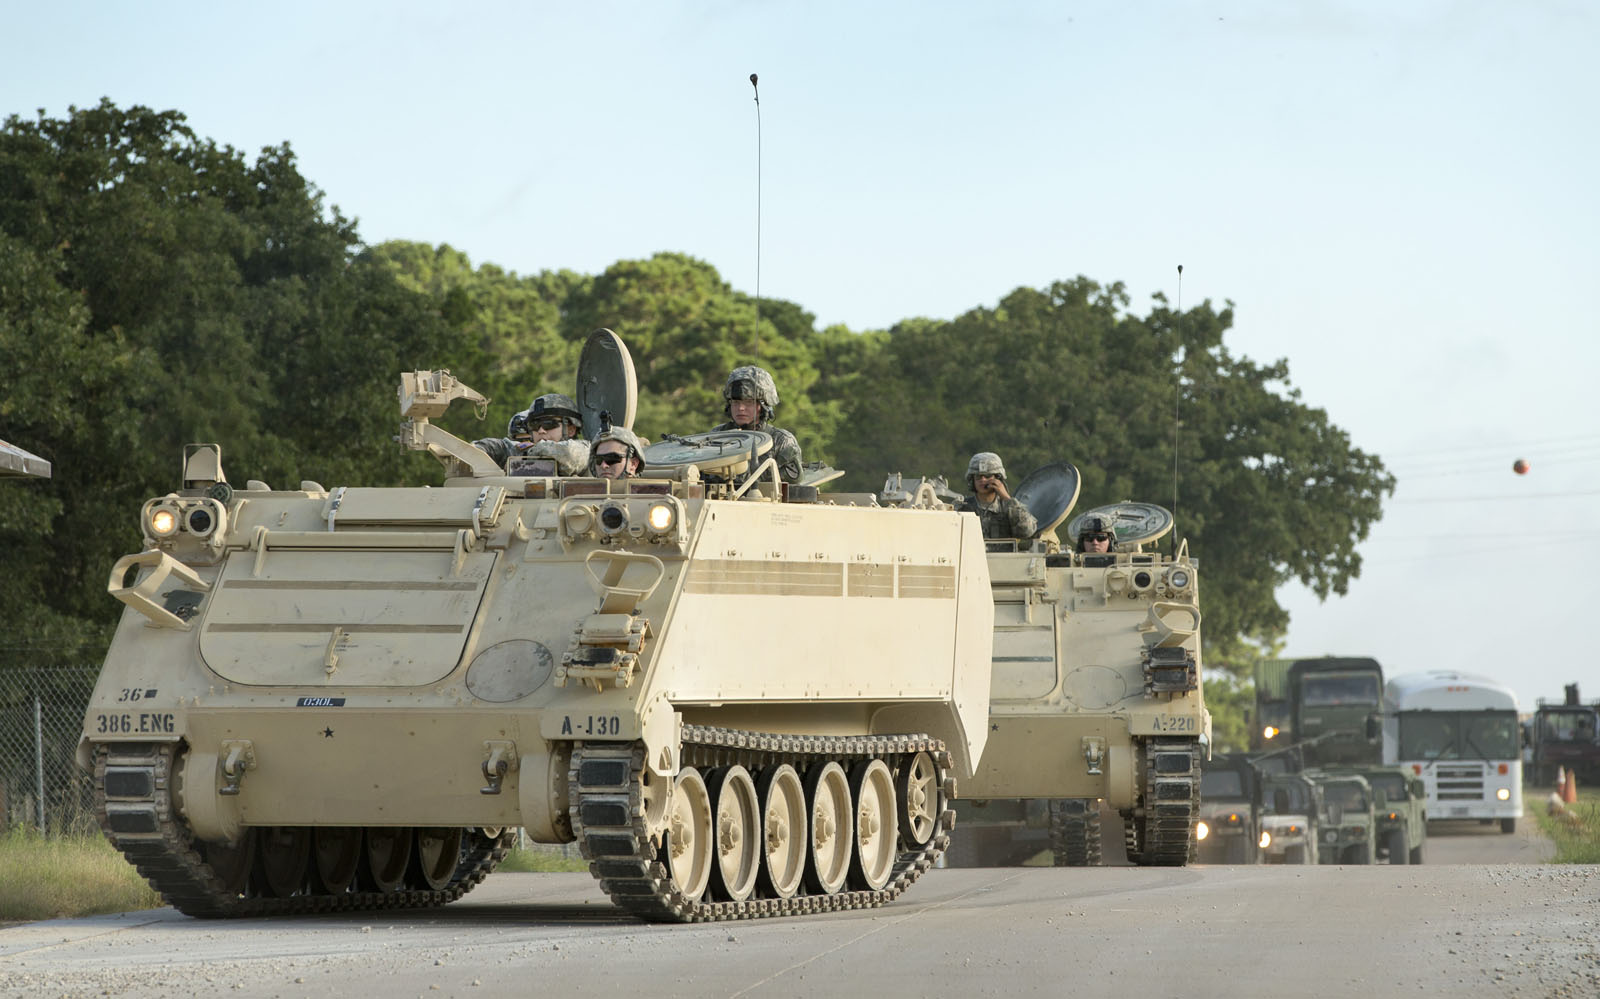 Looking back at Operation Jade Helm, the controversial military exercise